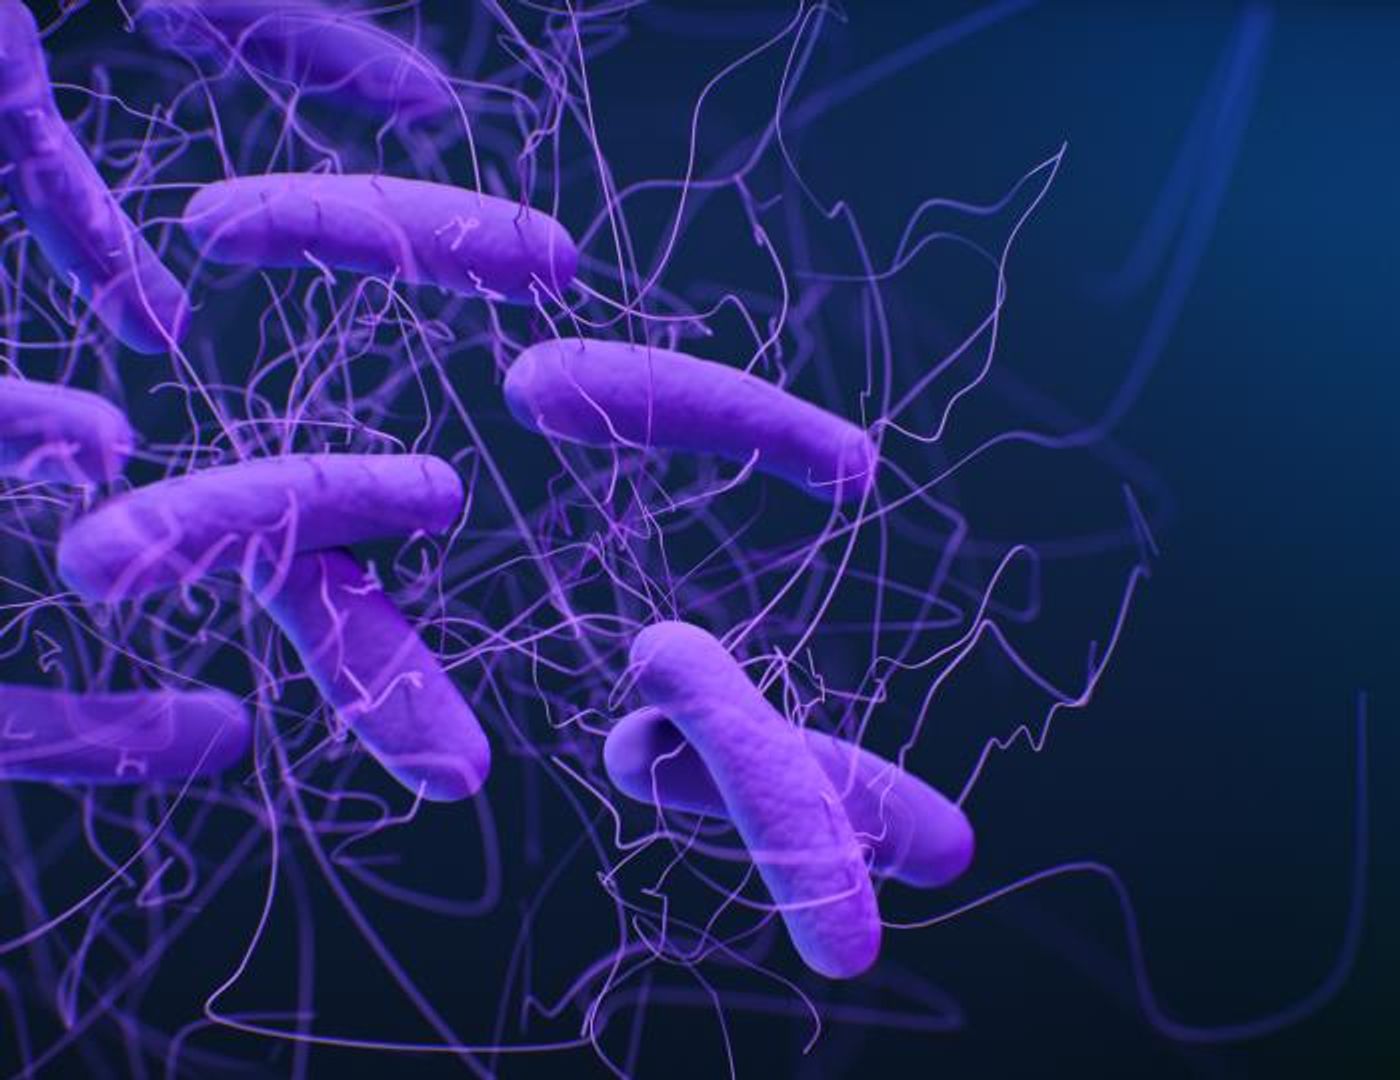 A medical illustration of Clostridioides difficile bacteria / Credit: CDC/ Antibiotic Resistance Coordination and Strategy Unit / Photo Credit: Medical Illustrator: Jennifer Oosthuizen